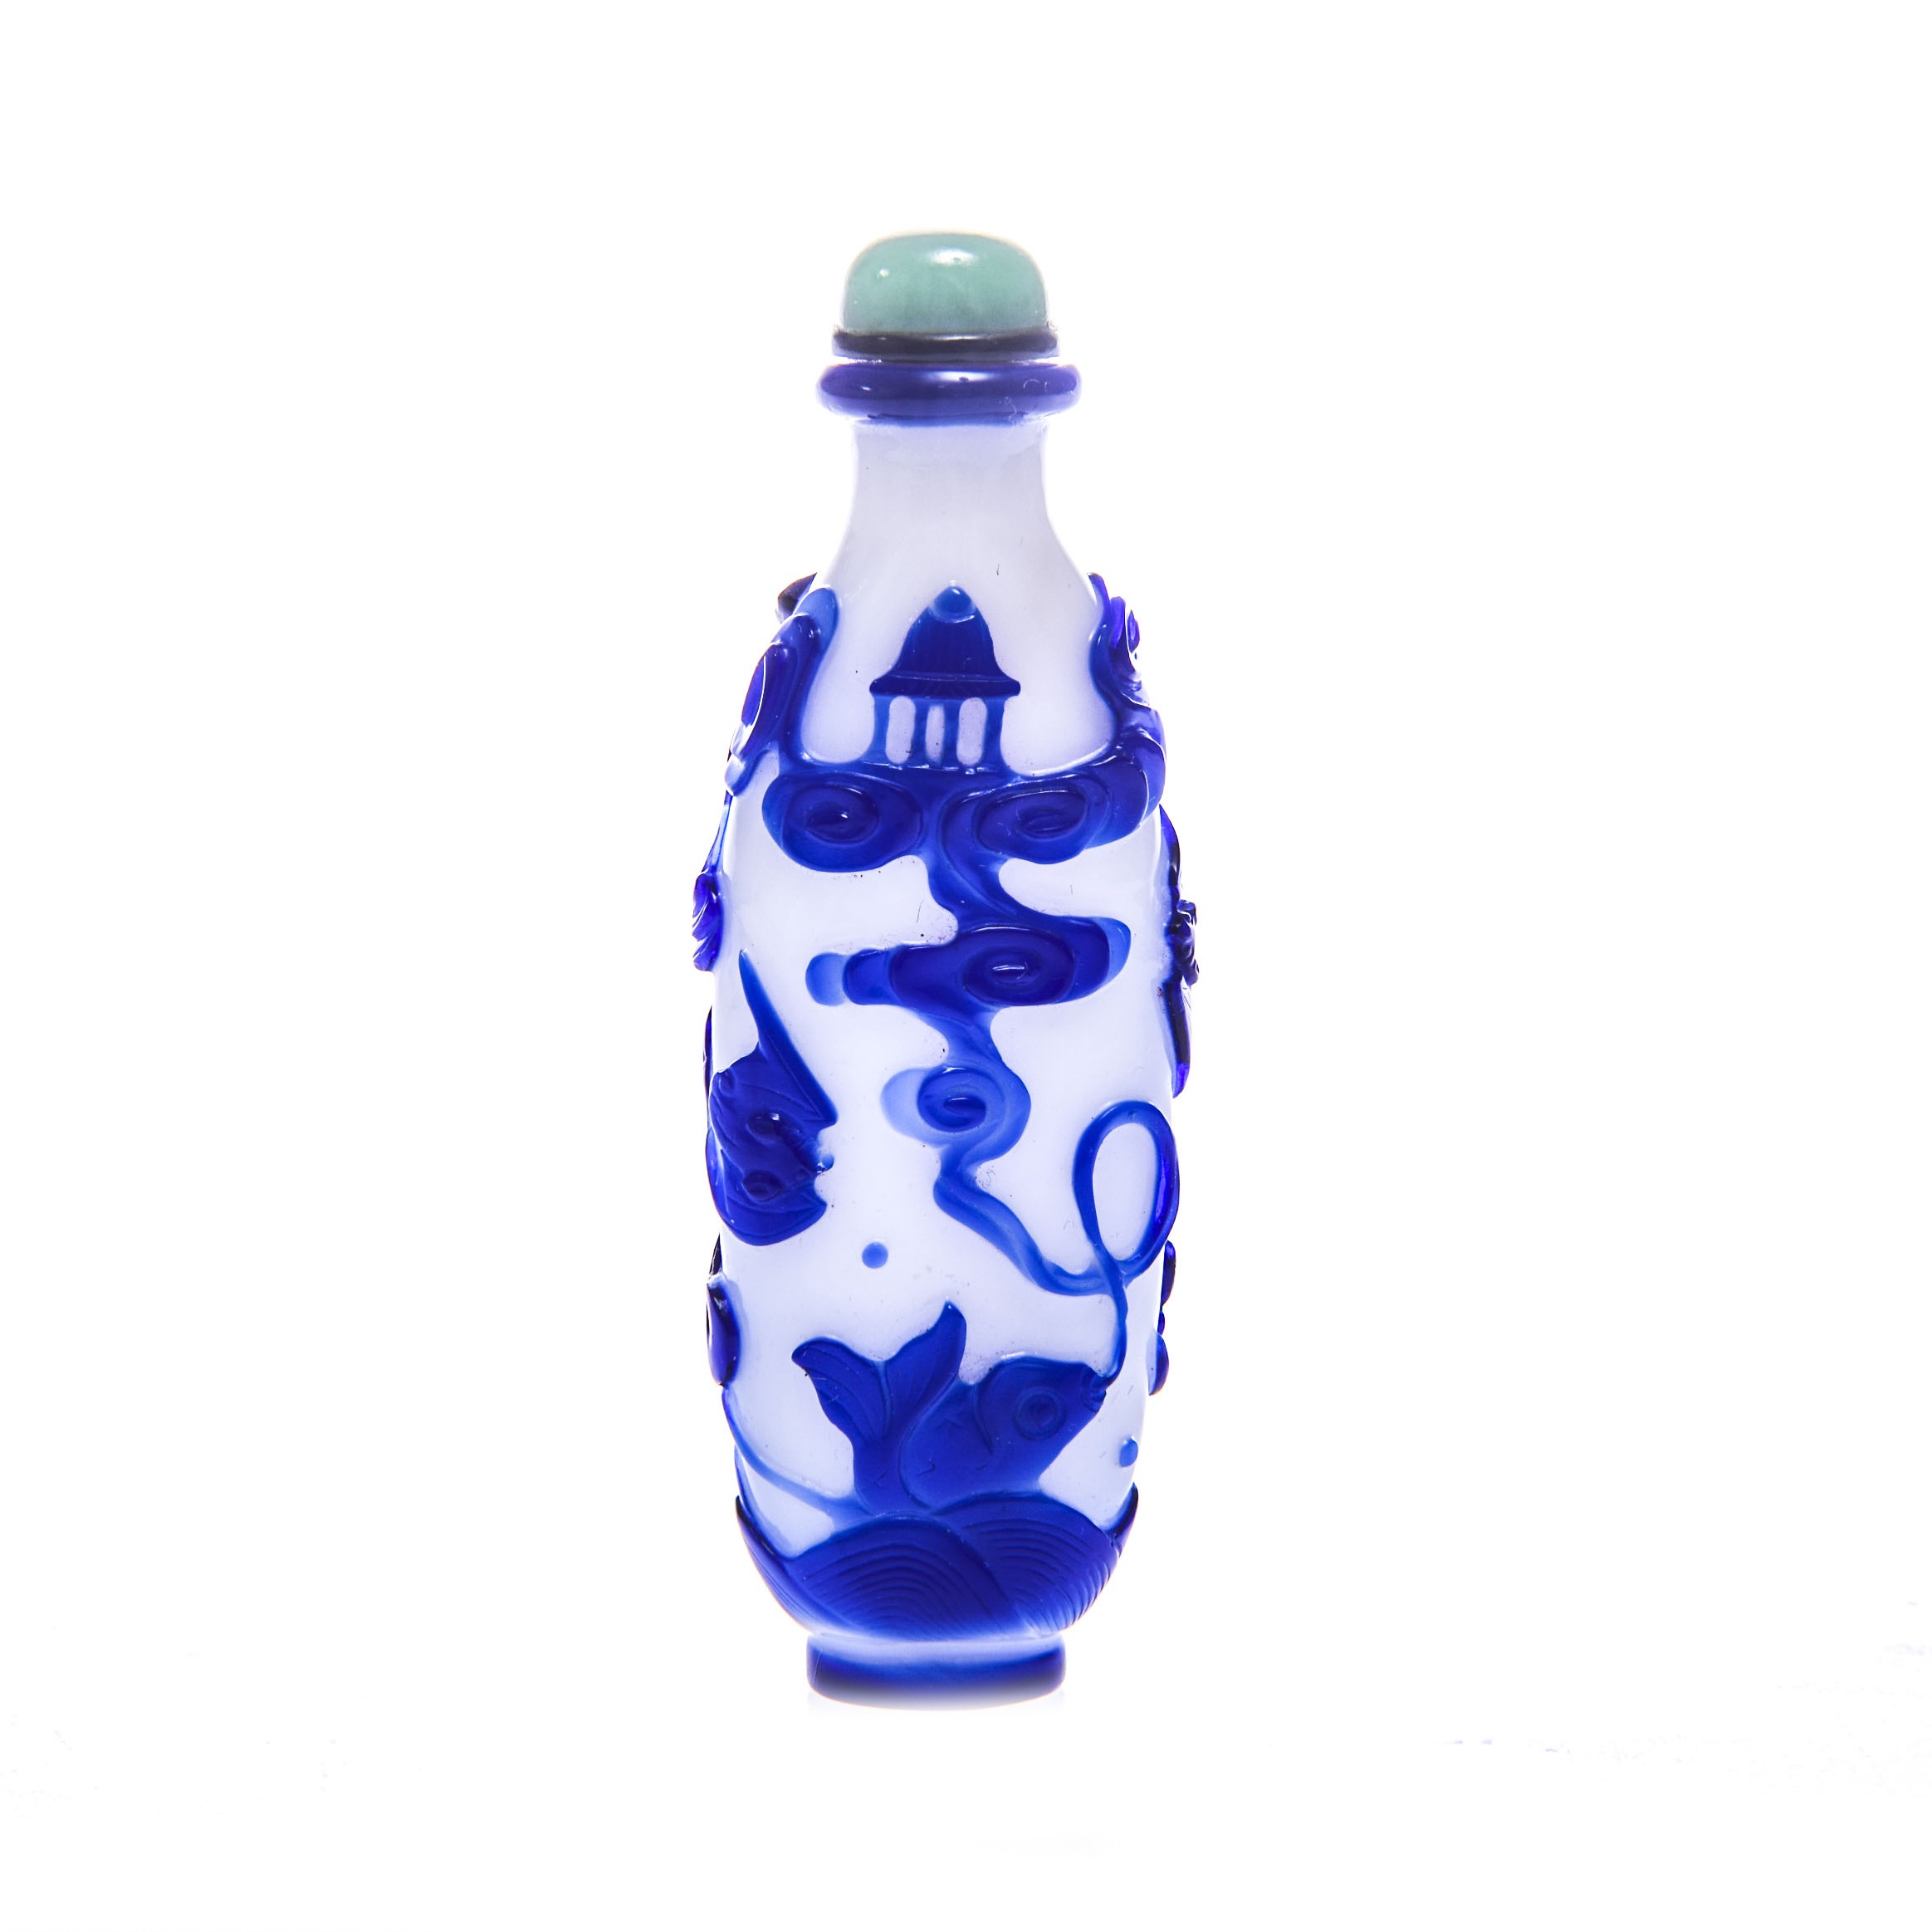 Peking Glass Snuff Bottle – Avery & Dash Collections